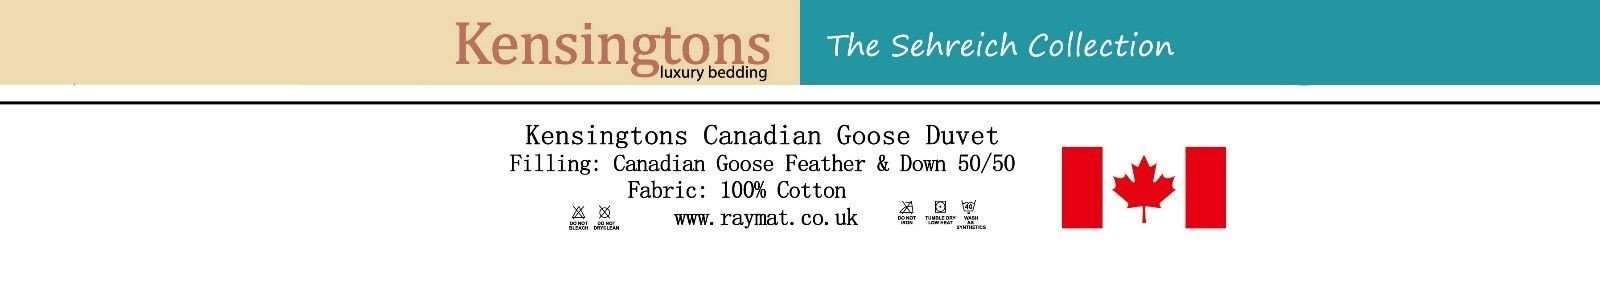 Canadian-Goose-Feather-&-Down-Duvet-50/50